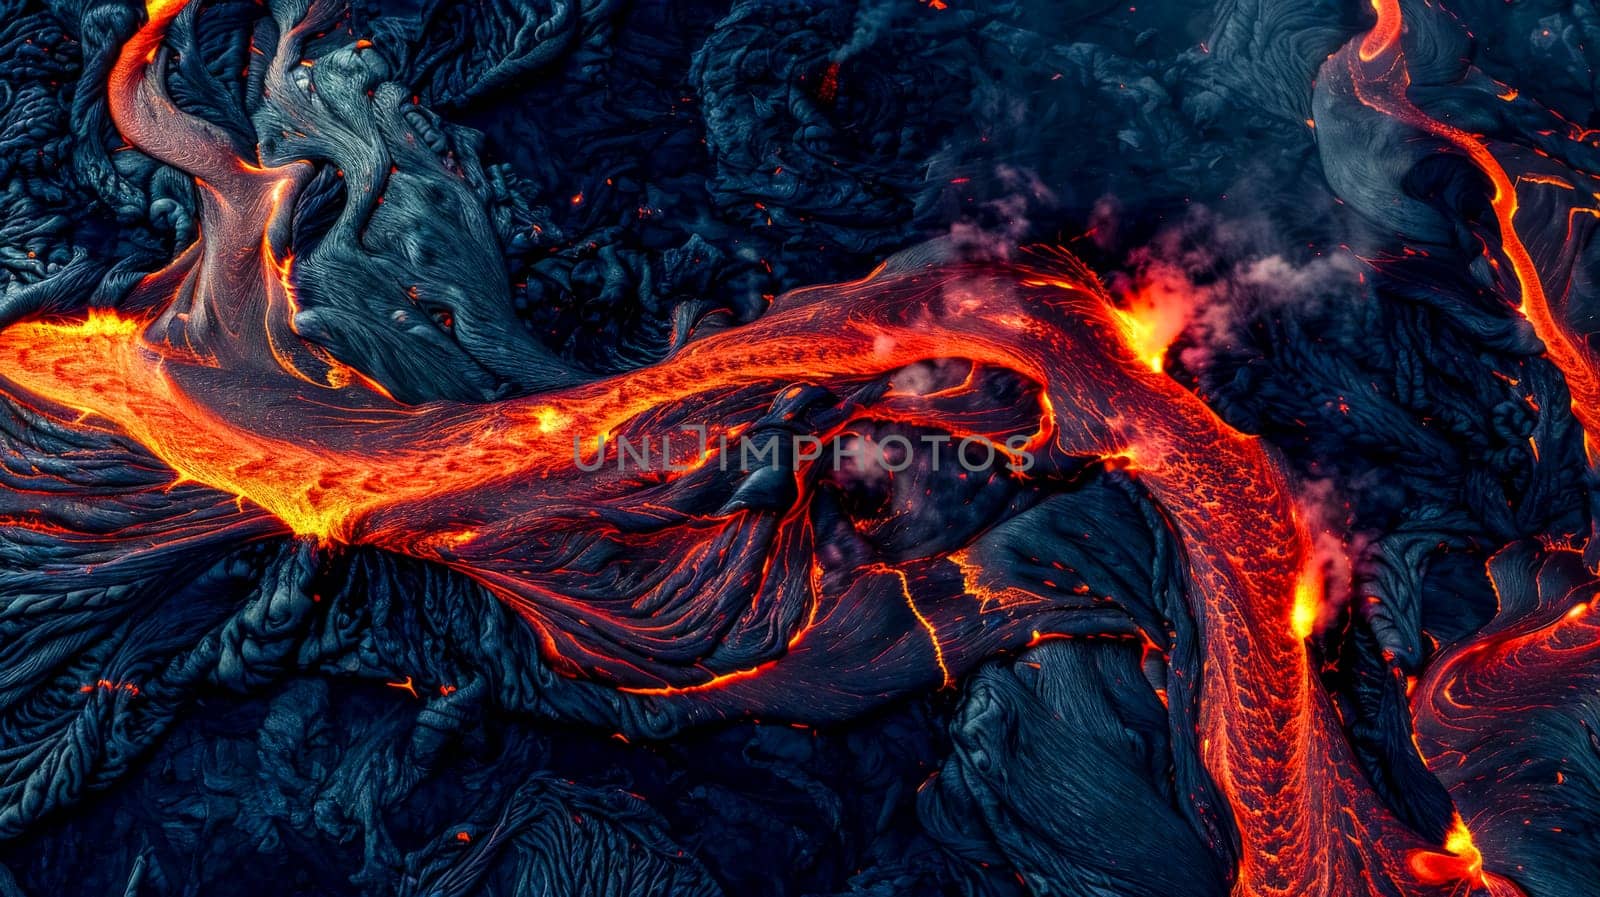 Vibrant image capturing the intricate patterns of a flowing lava river by Edophoto